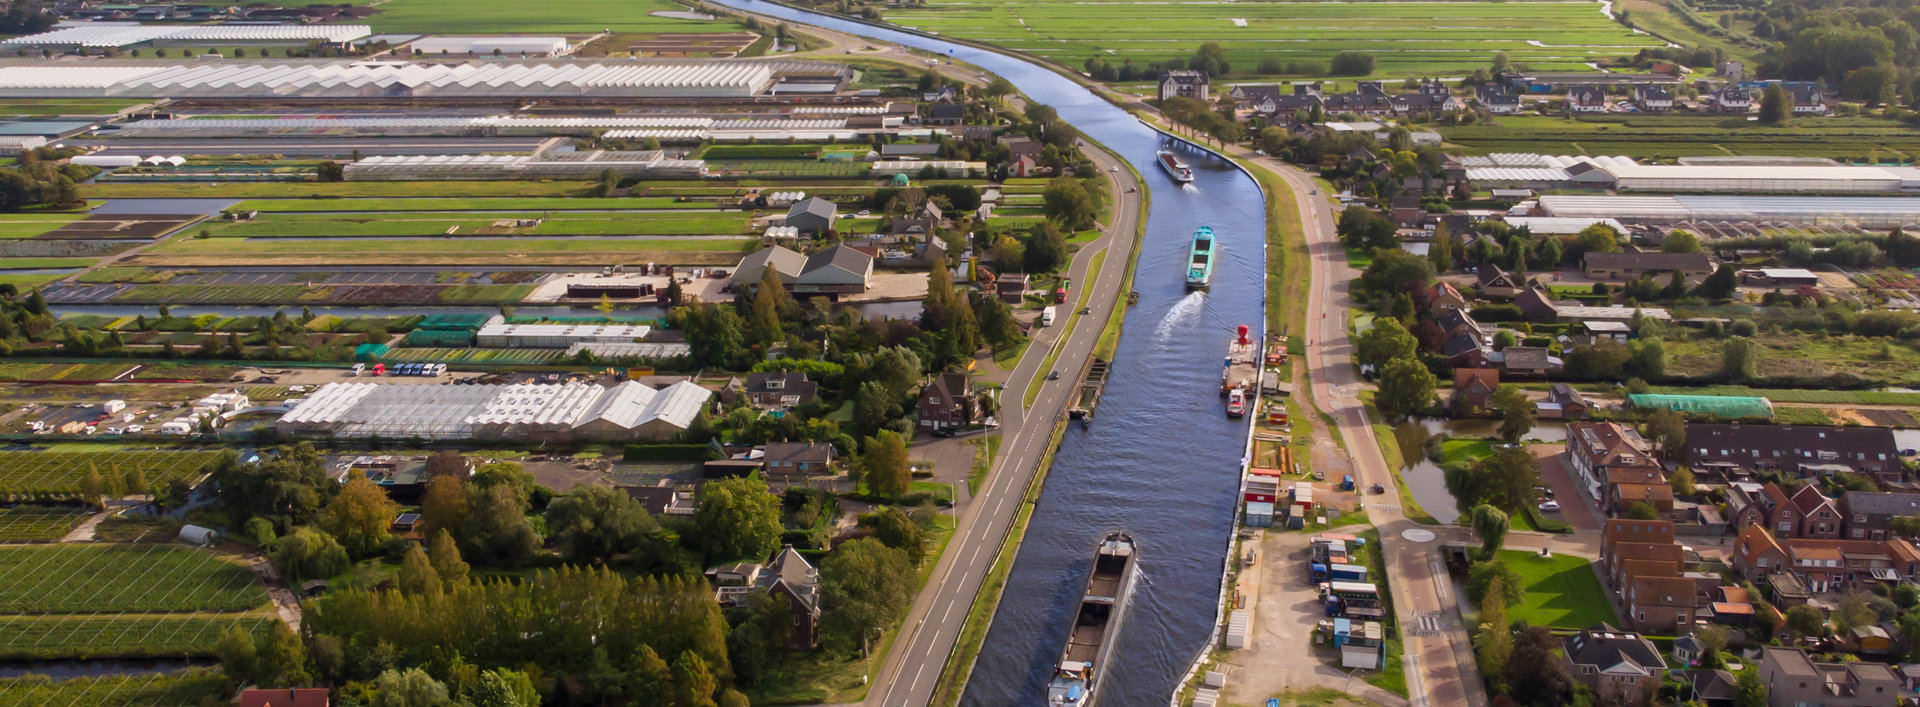 Aerial,Drone,View,Of,The,Gouwe,Canal,With,Some,Large